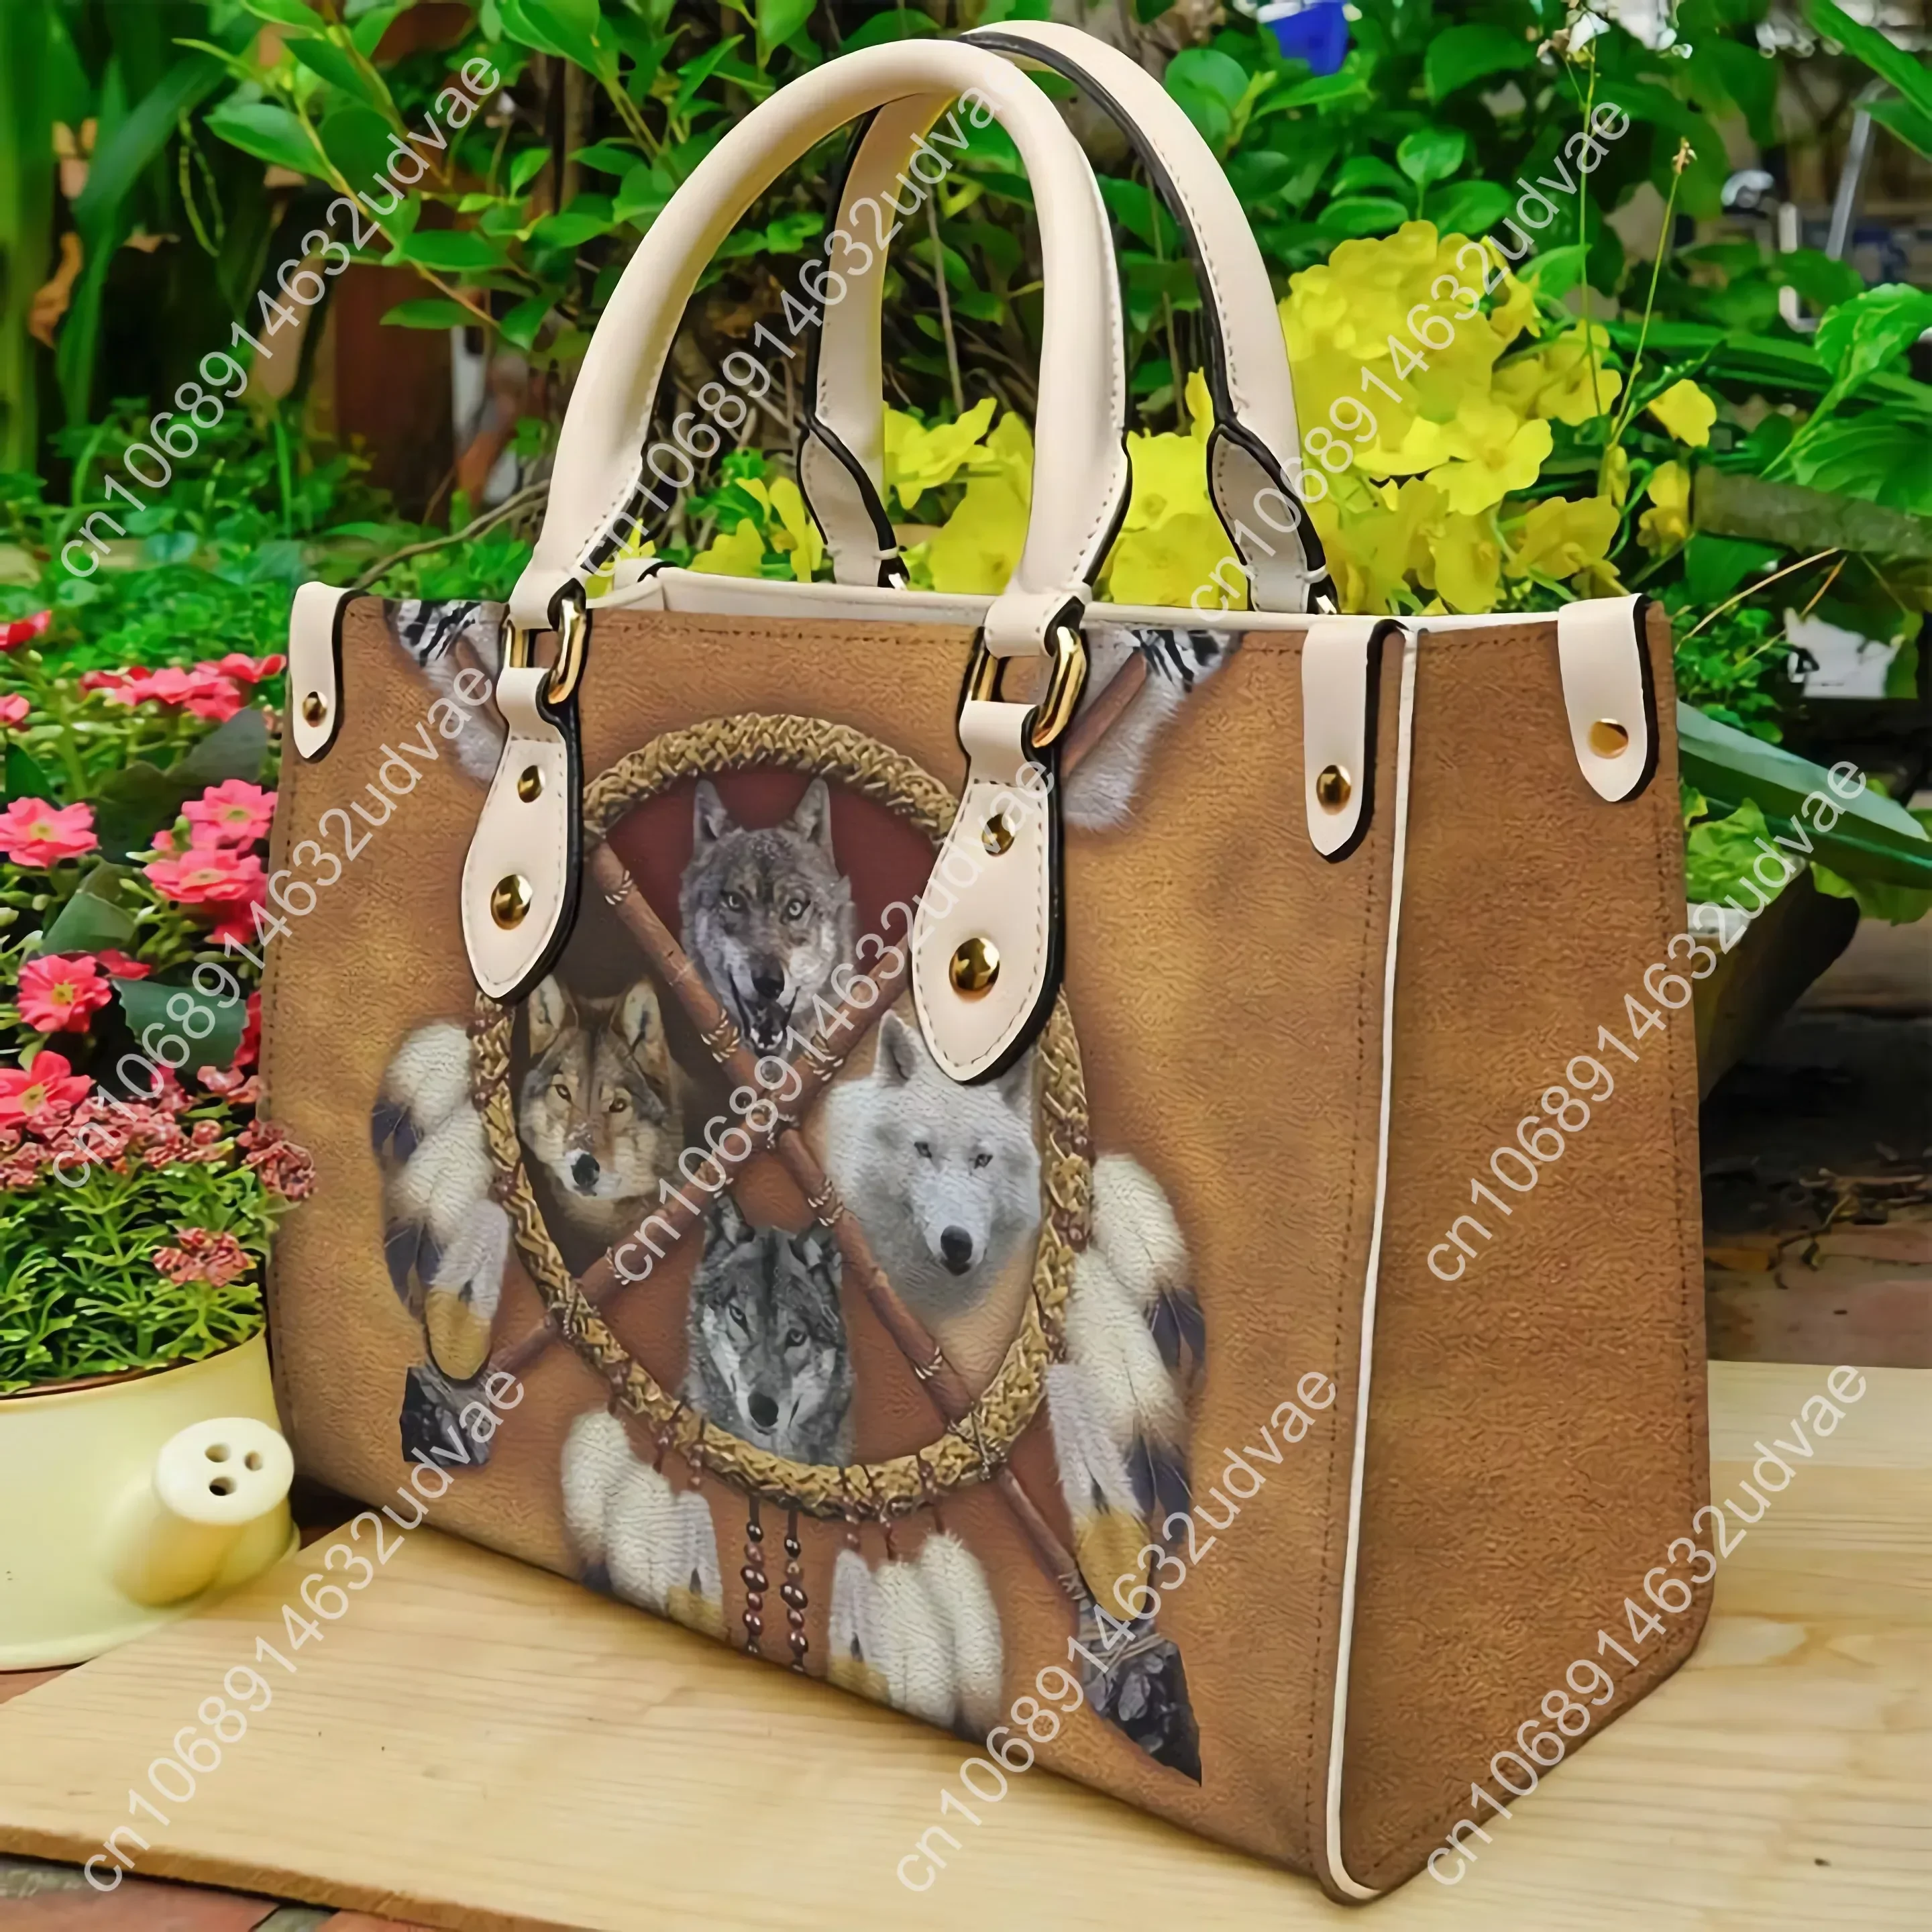 

Cywgift Hot Sale Retro Wolf Design Casual Womens Tote Bag Fashion Pu Leather Handbag for Laides Cross Bags 2022